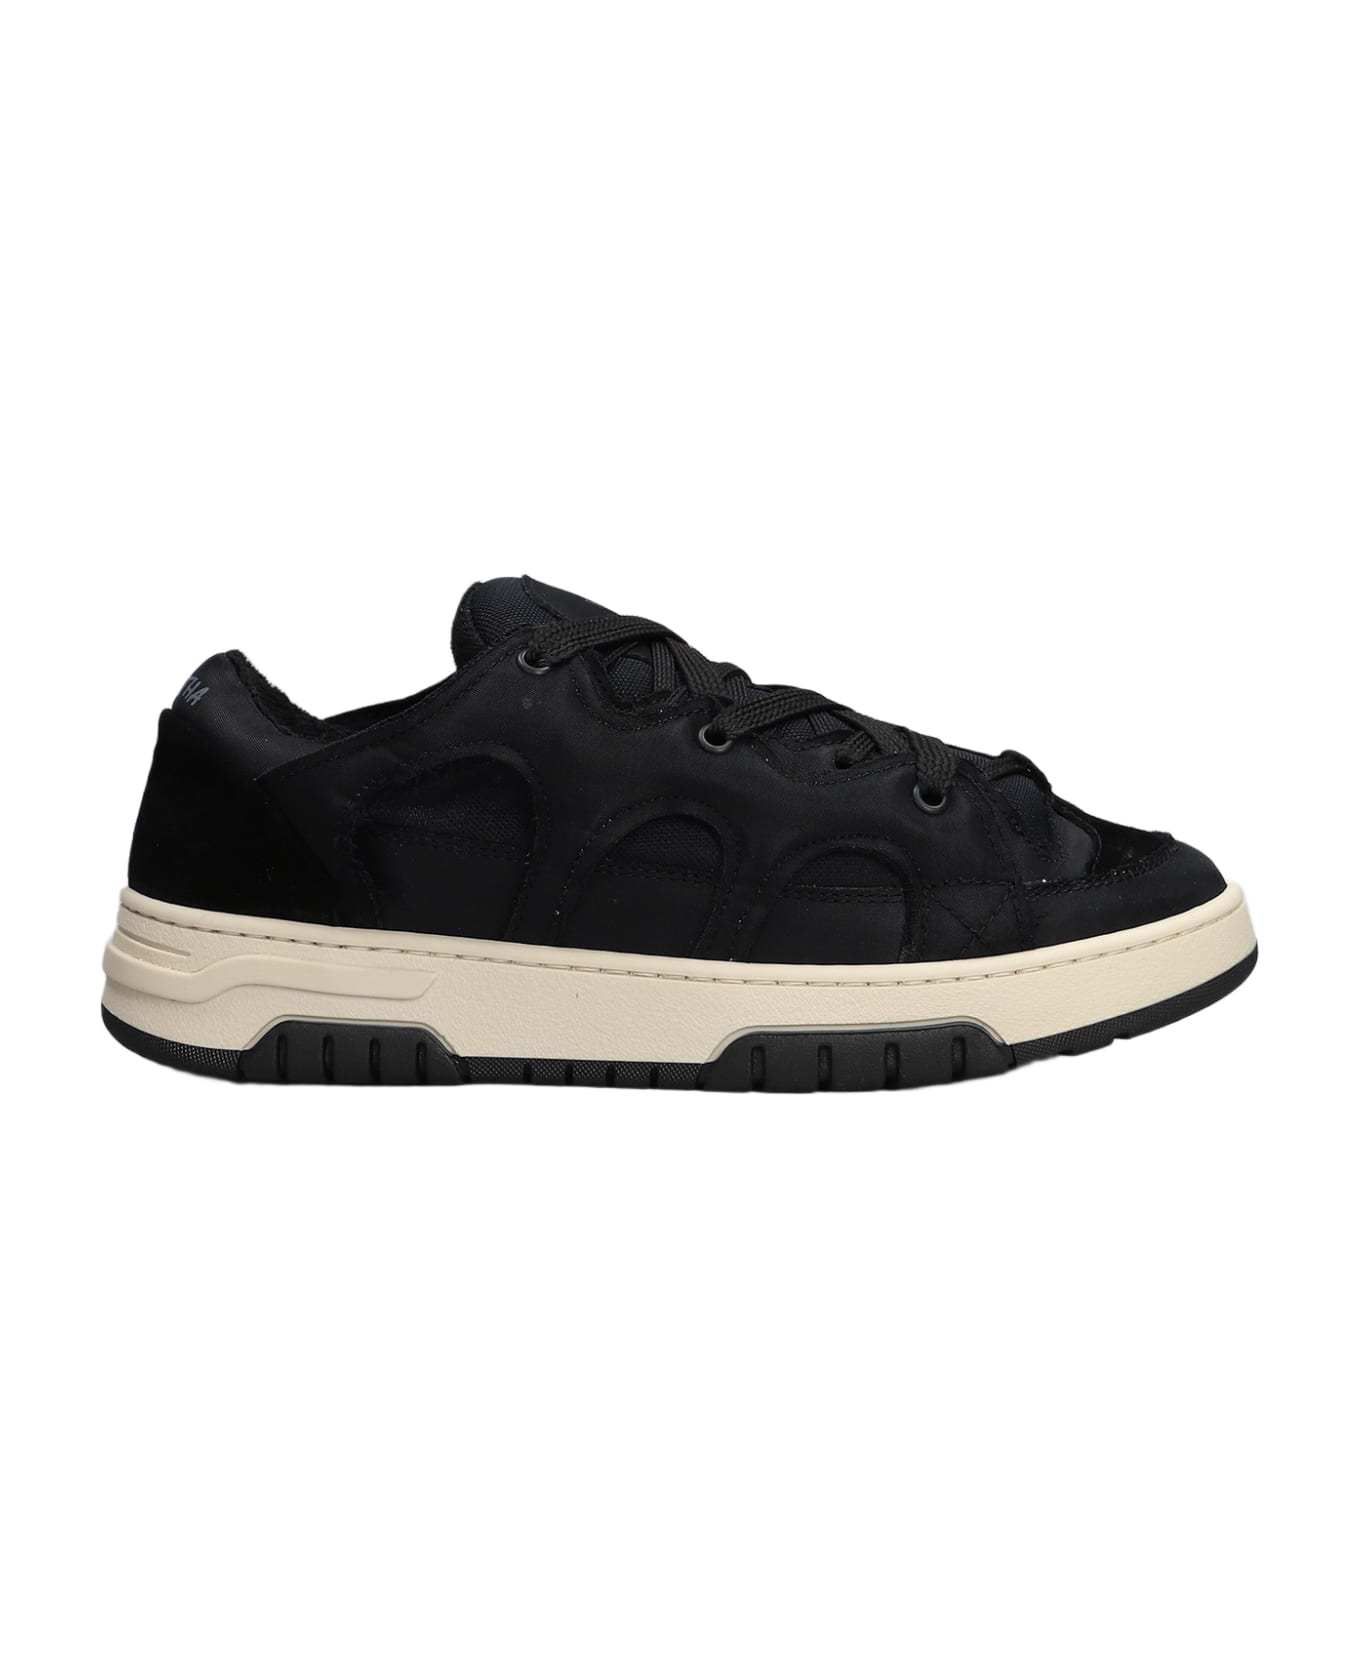 Paura Santha 1 Sneakers In Black Suede And Fabric - black